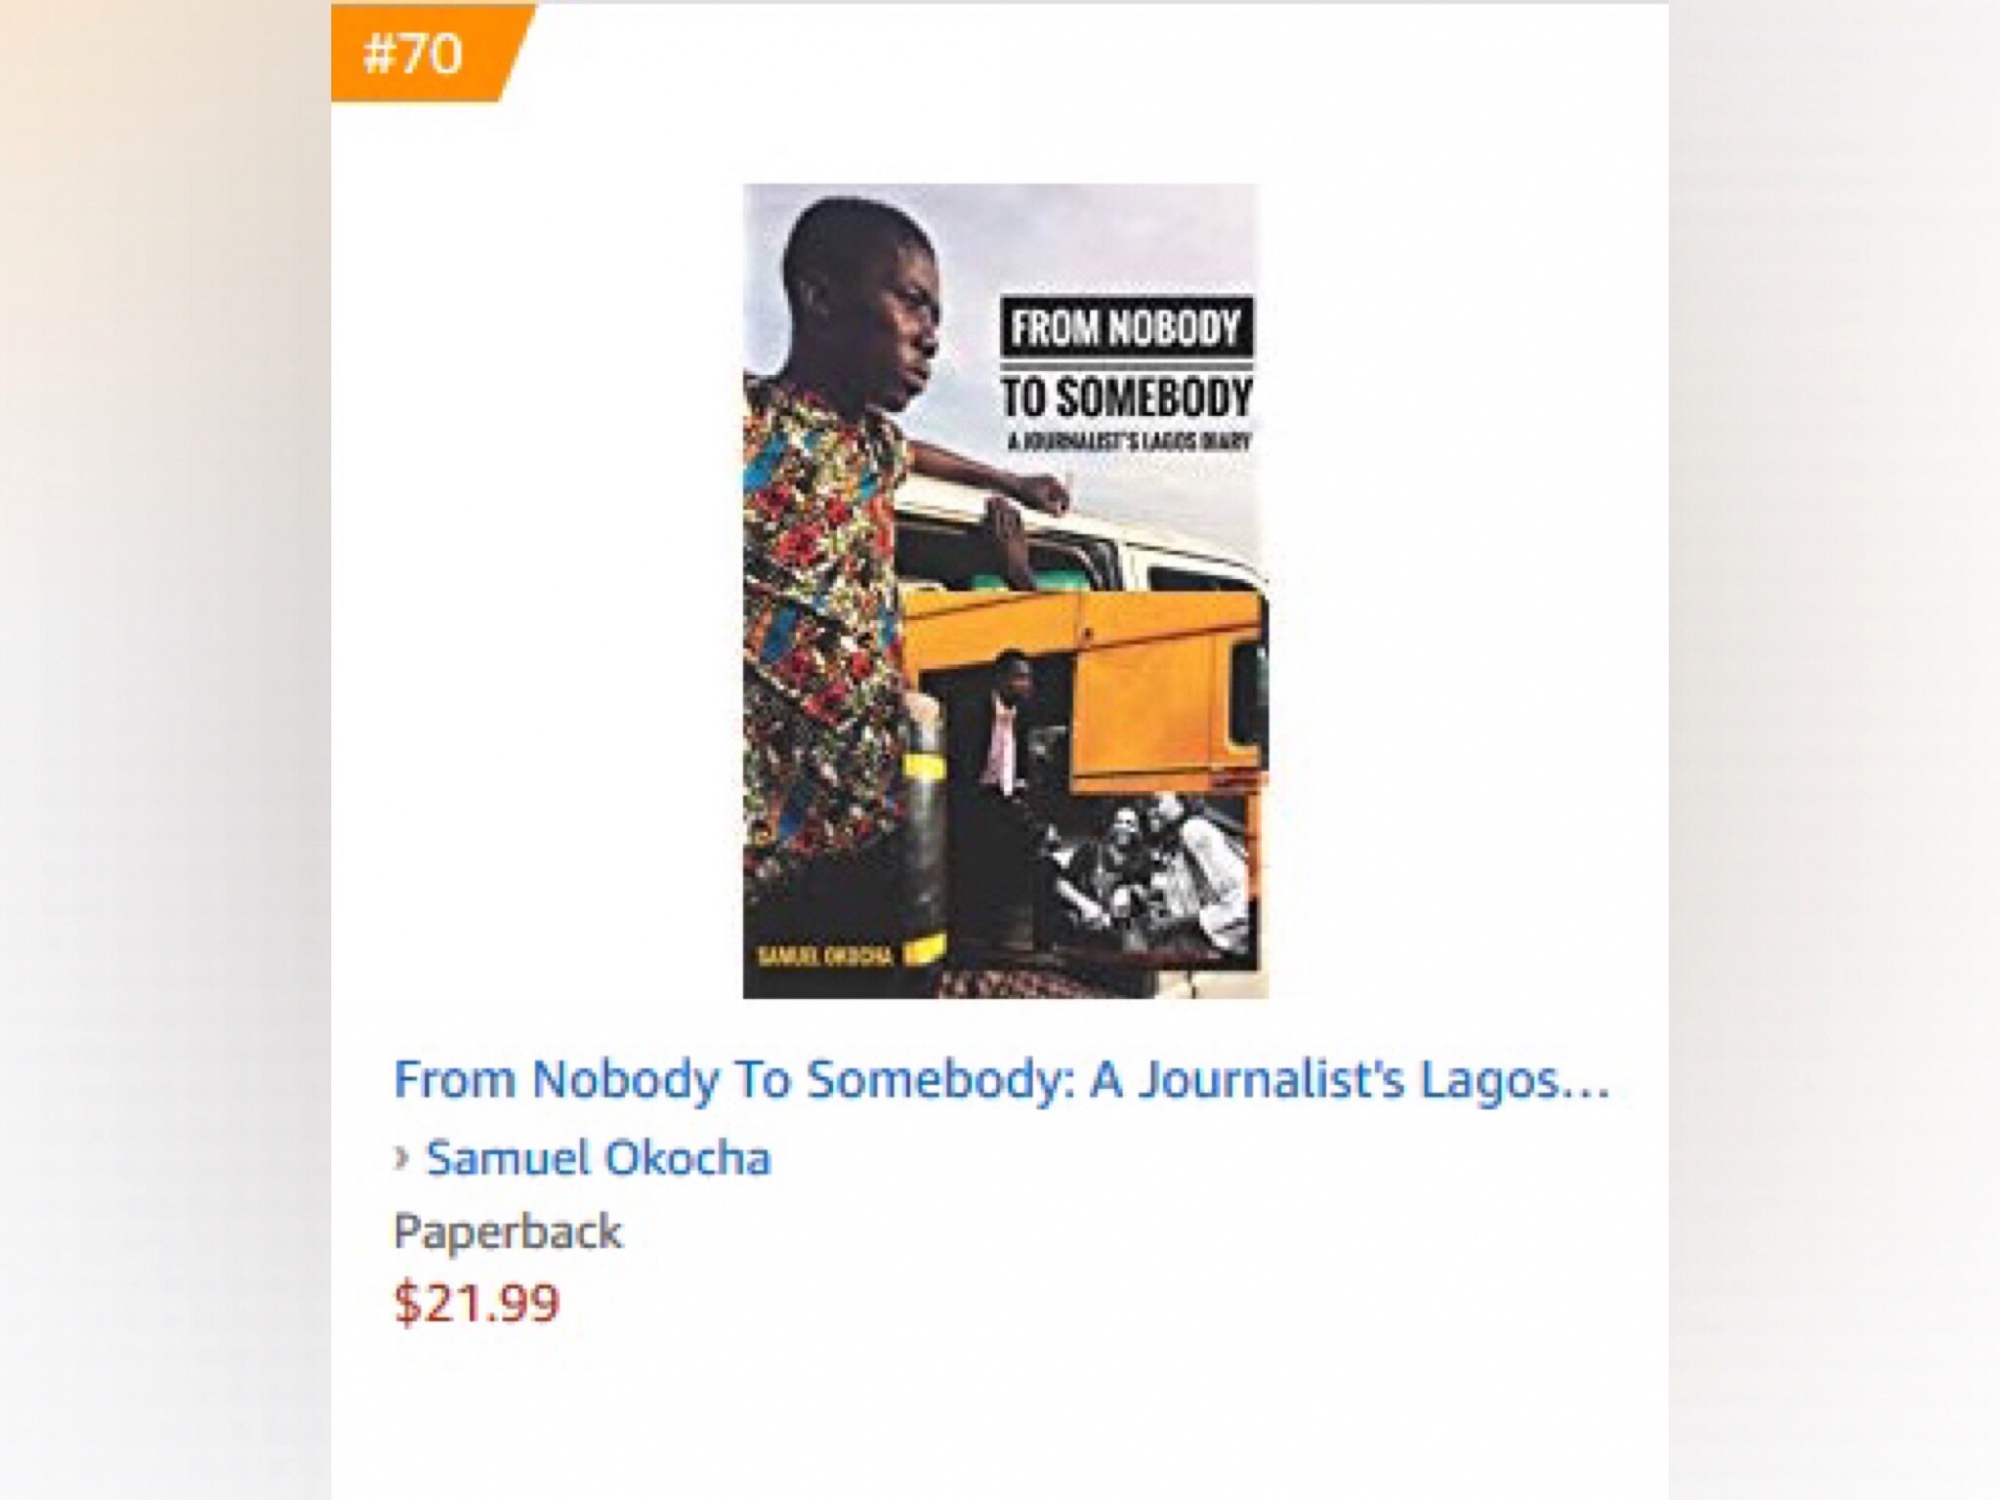 Art and Documentary Photography - Loading TOP_1OO_AMAZON_BEST_SELLERS.JPG